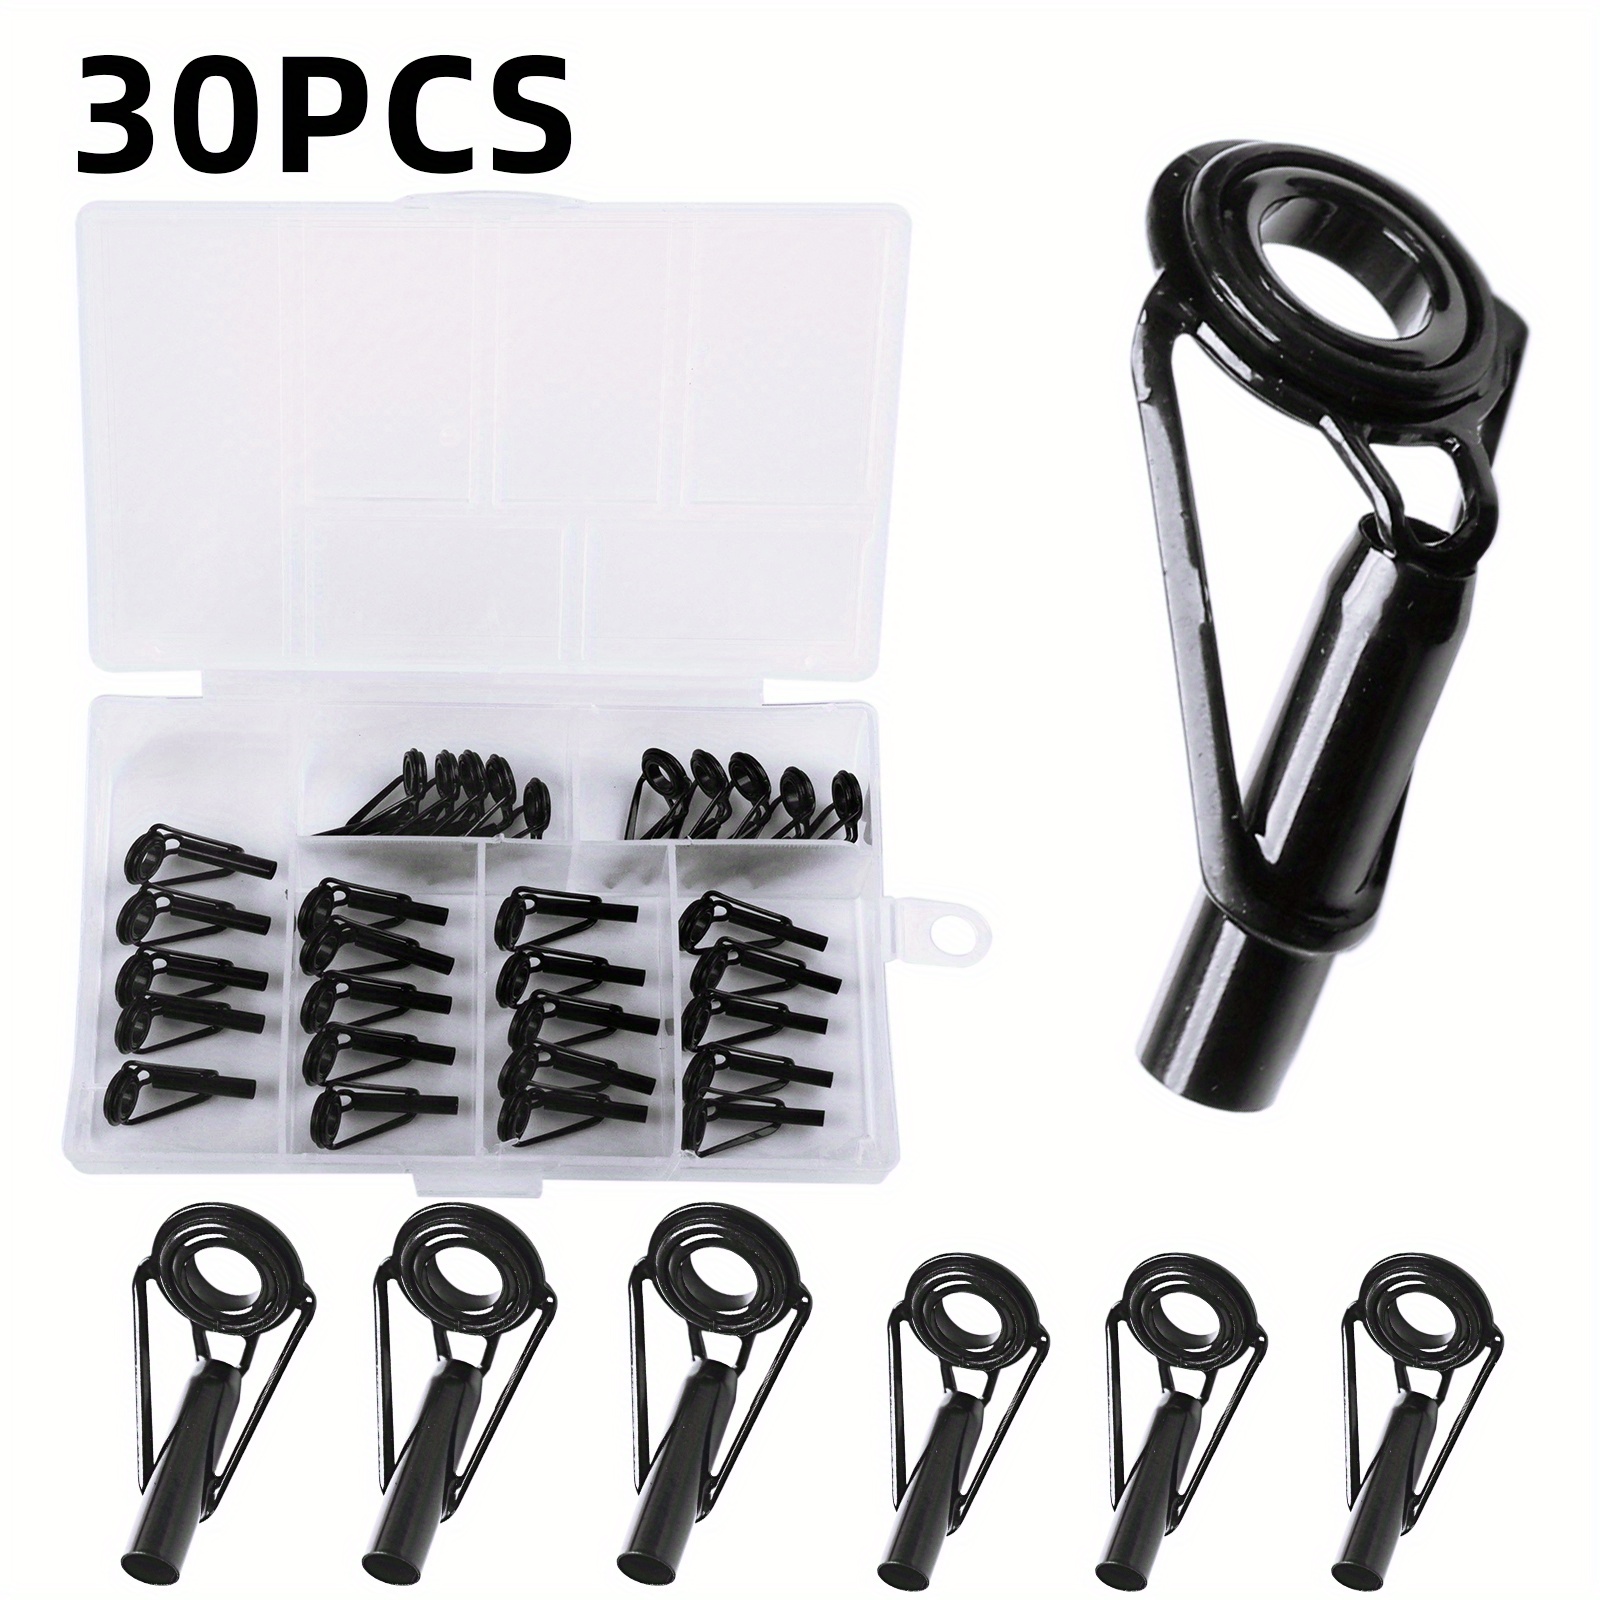 Hifisher Fishing Rod Tip Repair Kit: 40pcs 8 Sizes Top Guides ,1oz Epoxy  Resin, Brush, Measure Cup, Fishing Rod Guides Replacement kit, Stainless  Steel Ceramic Ring Guide Tips : : Sports 